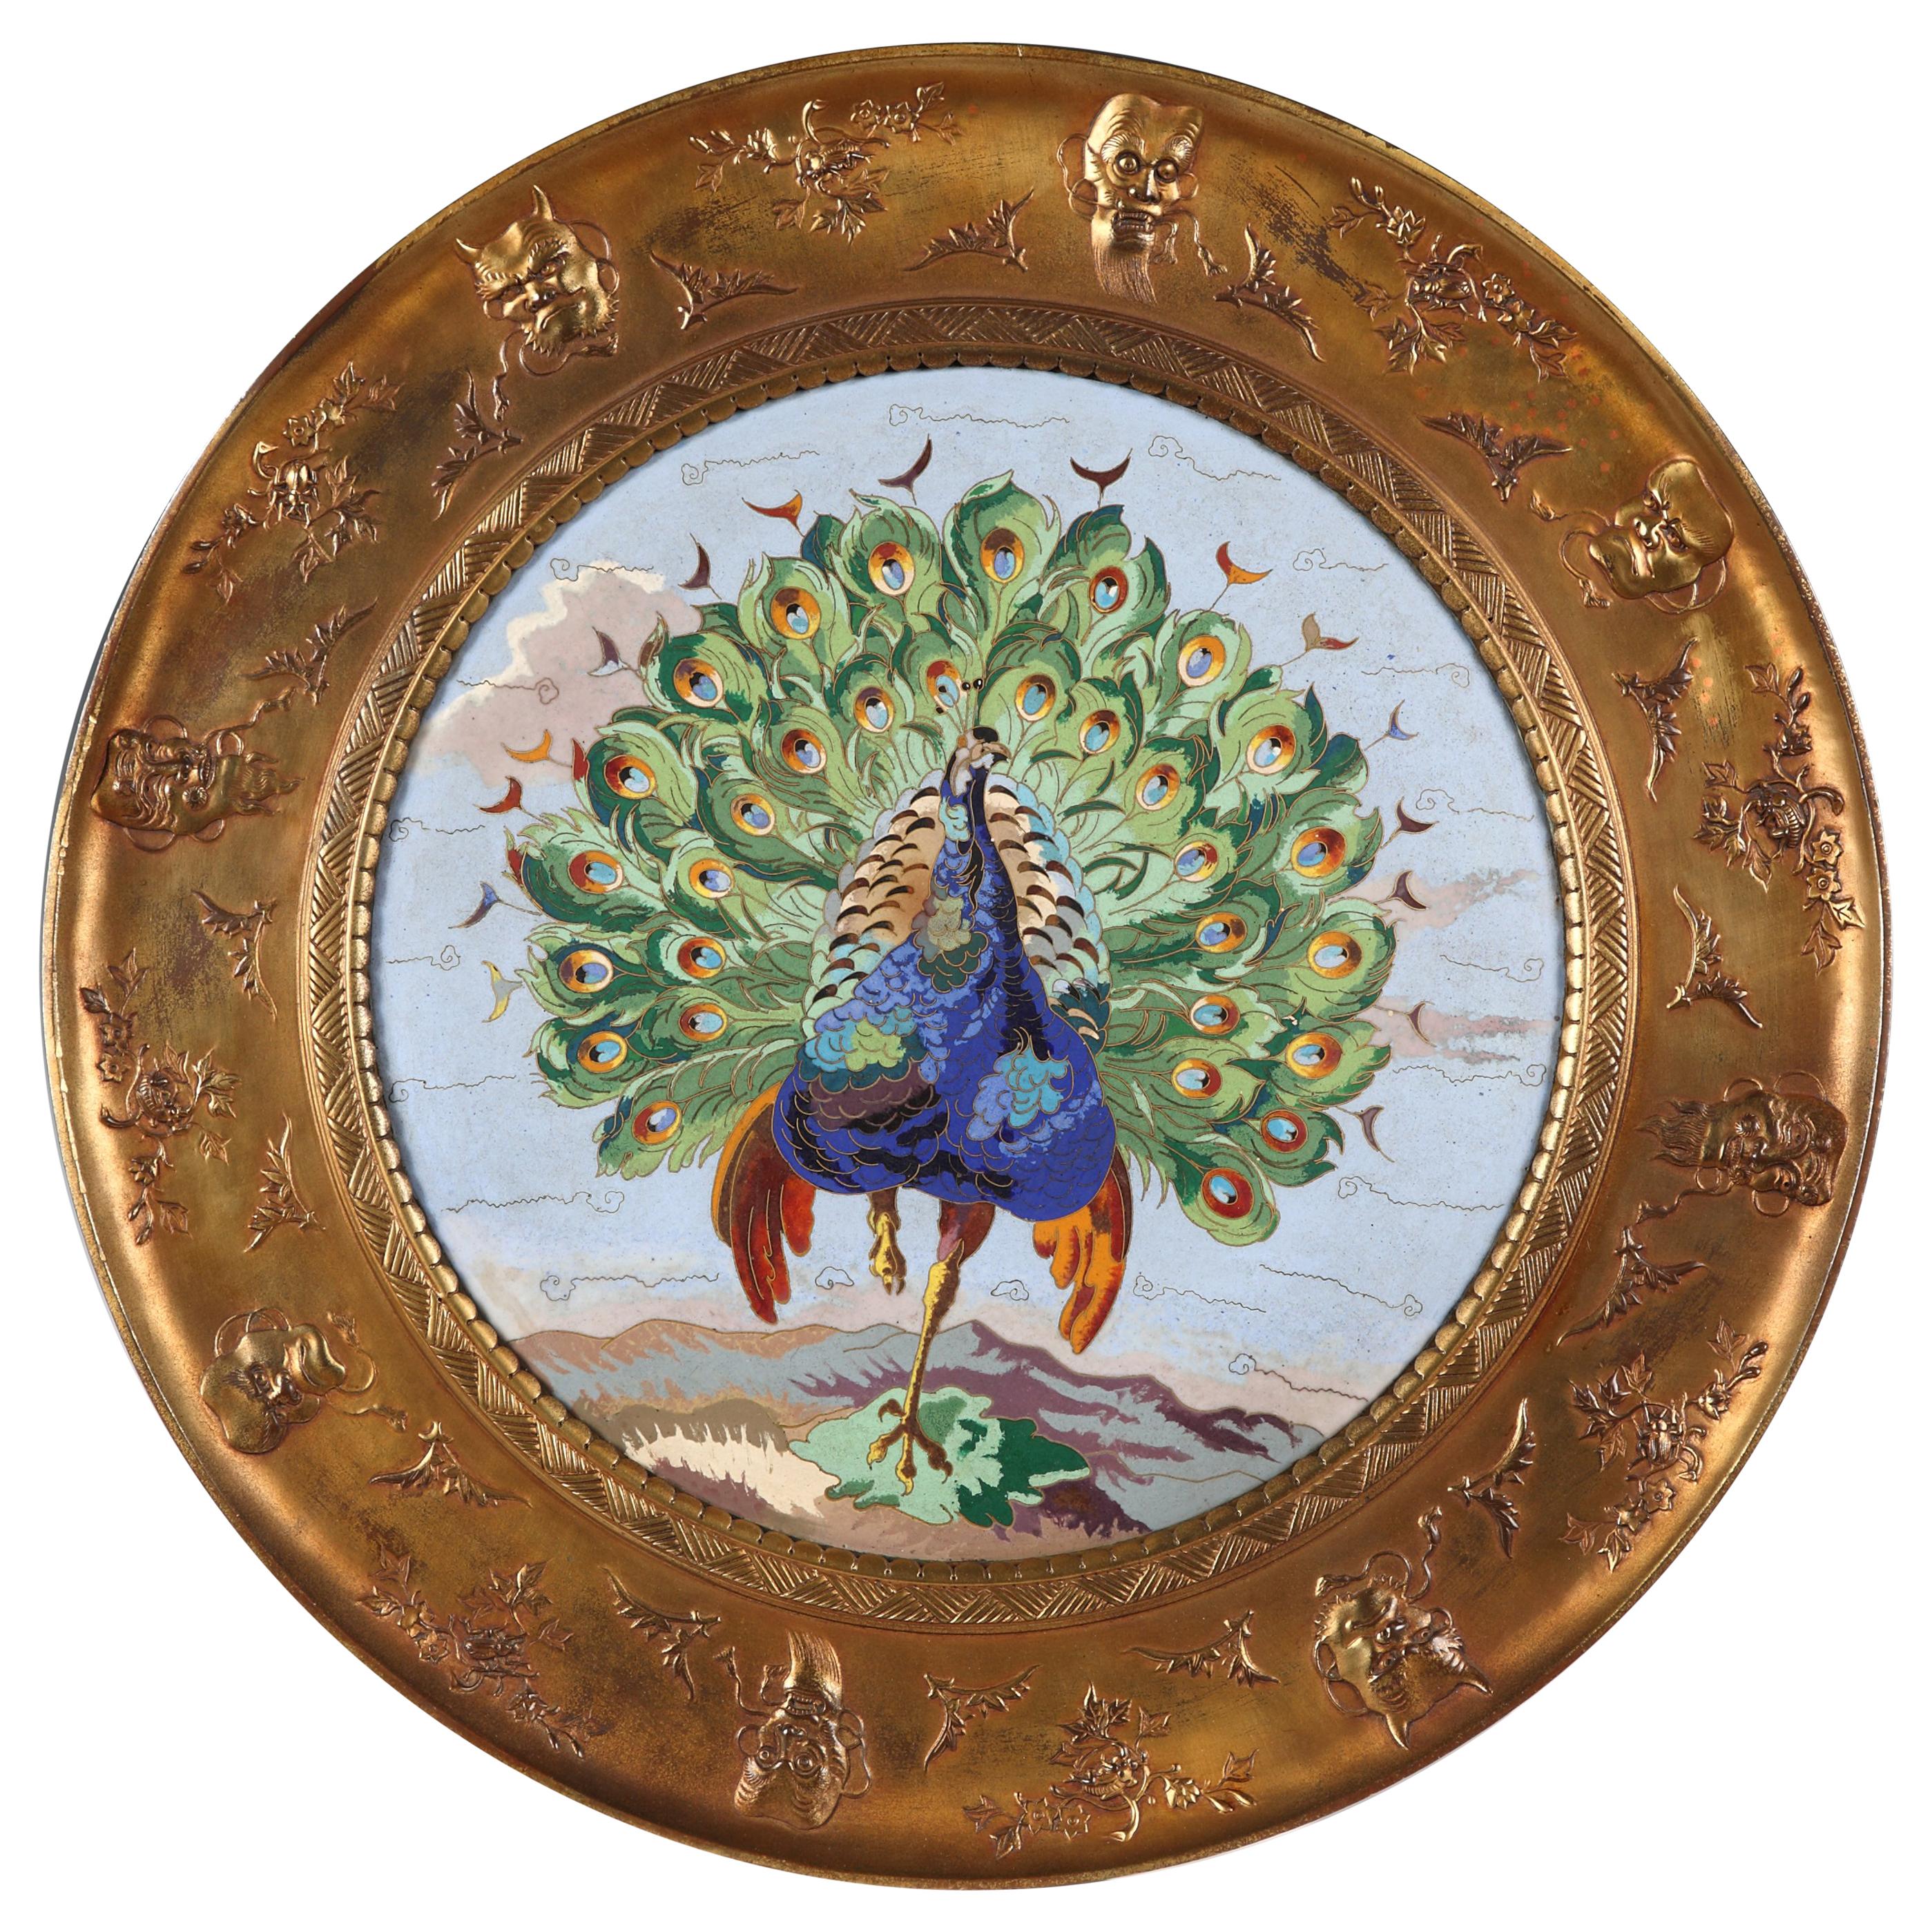 Aesthetic Movement Enameled Plate Attributed to Elkington and A. Willms, c. 1875 For Sale